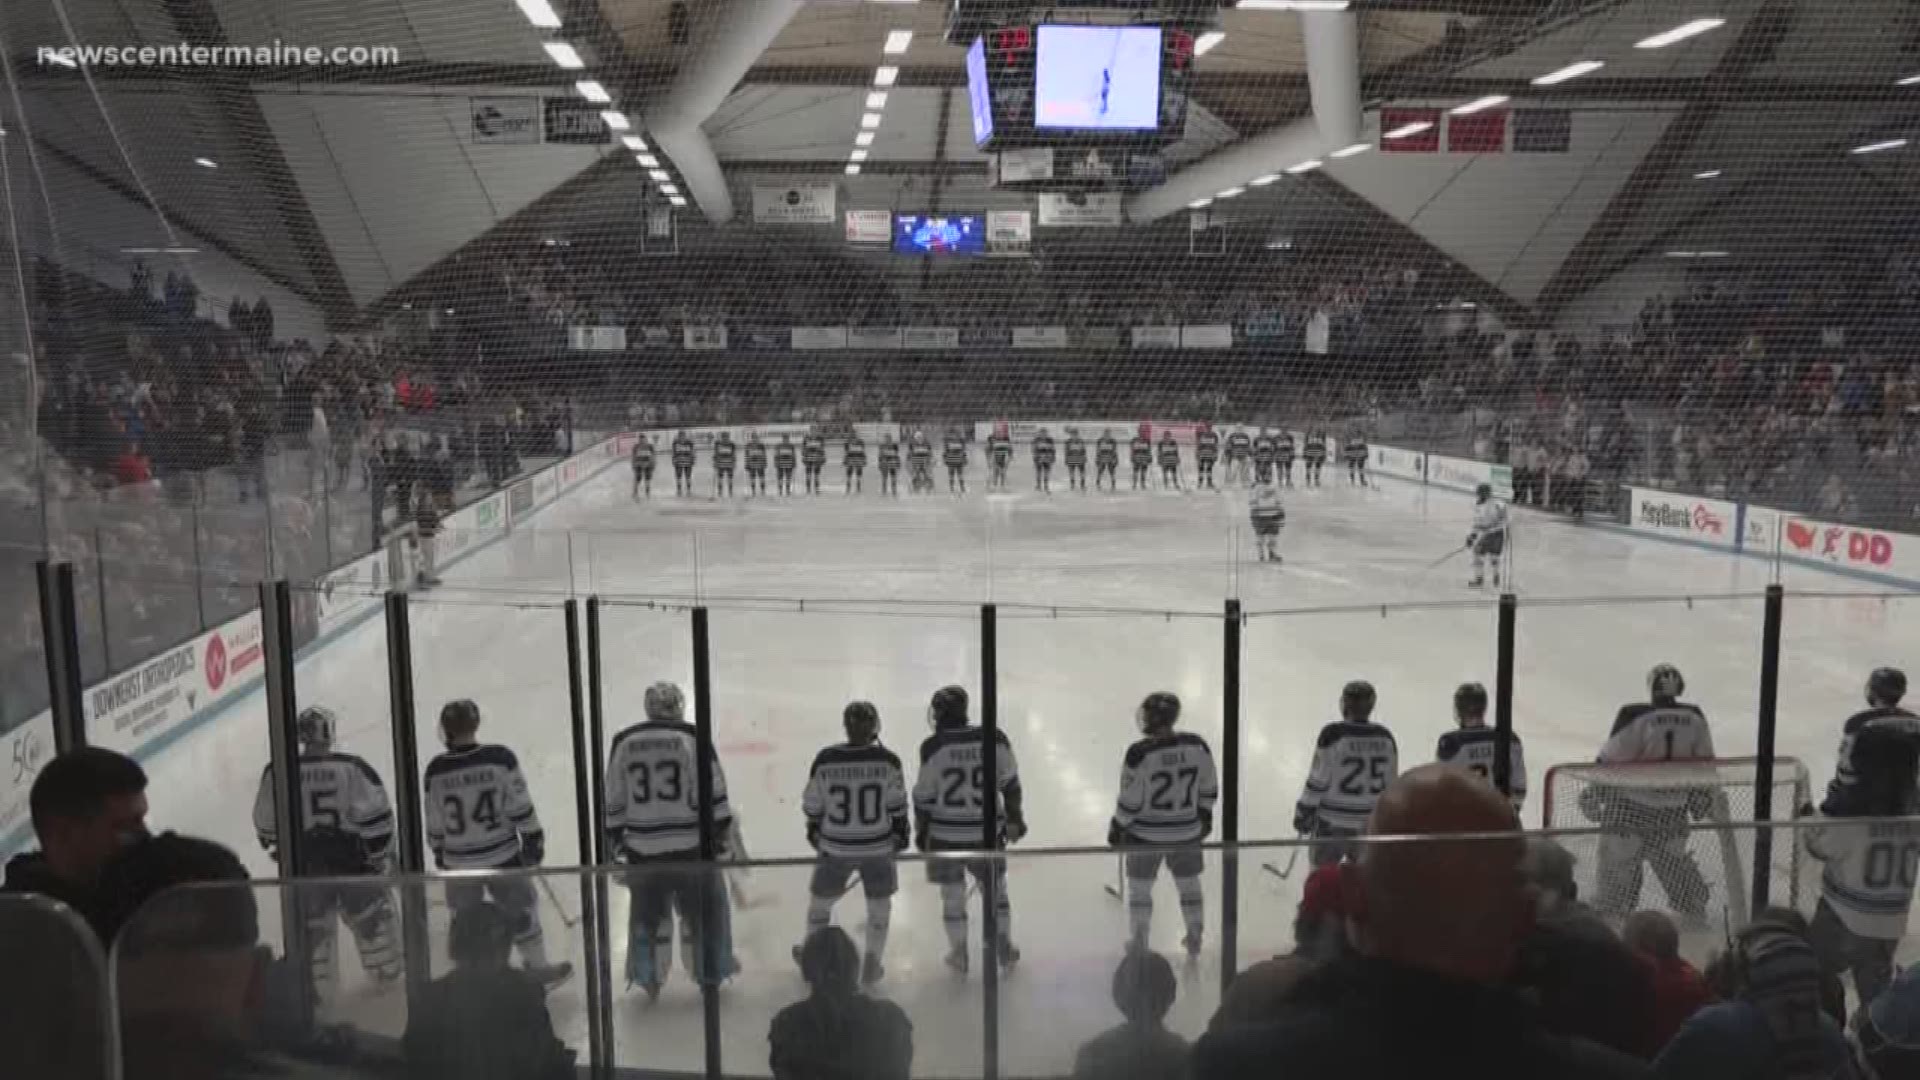 University of Maine at Orono hosts the University of New Hampshire for tied hockey game Monday.